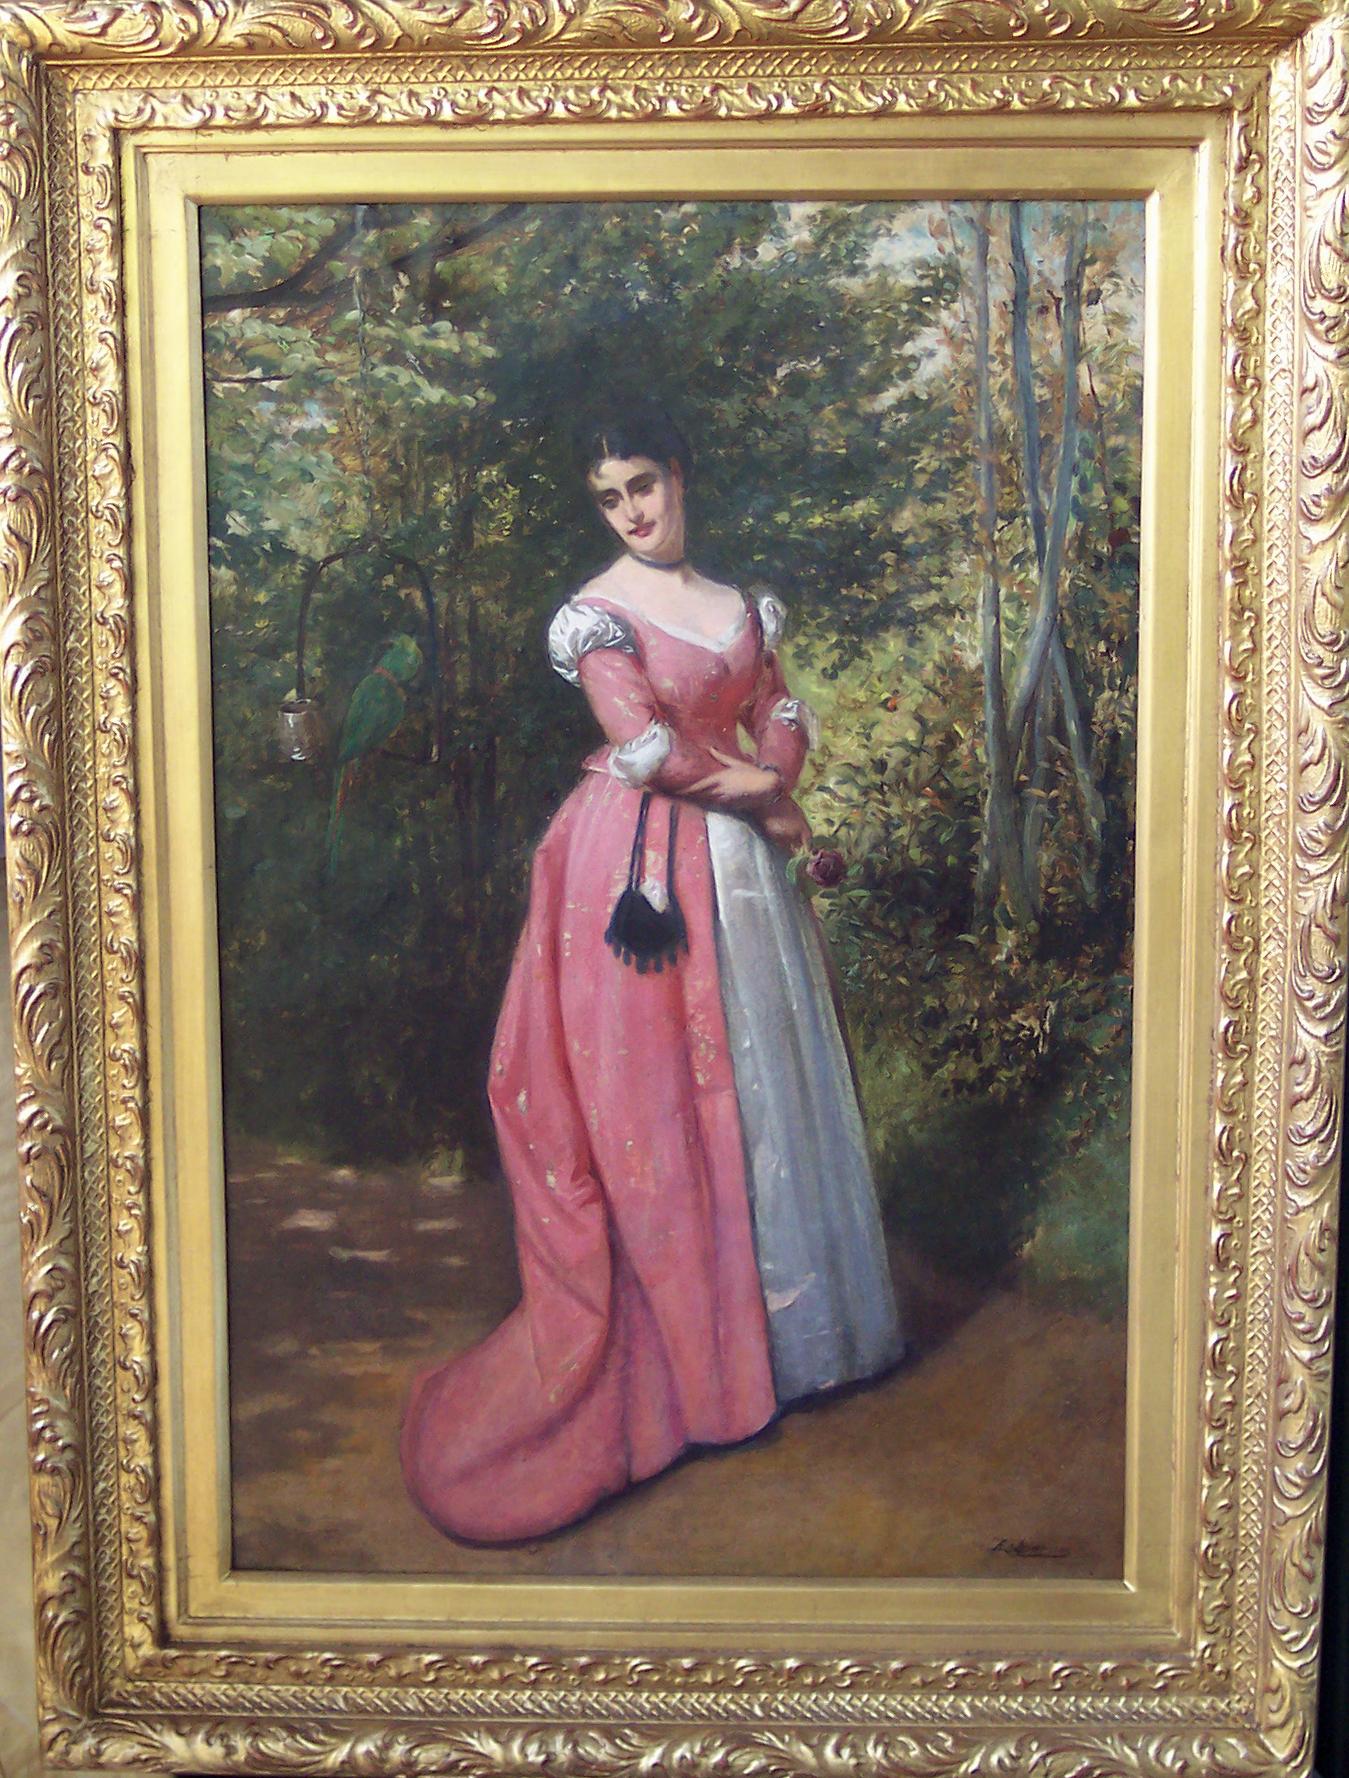 Victorian Woman Standing in Garden Admiring a Parrot 19th c English oil painting - Painting by Edward Charles Barnes